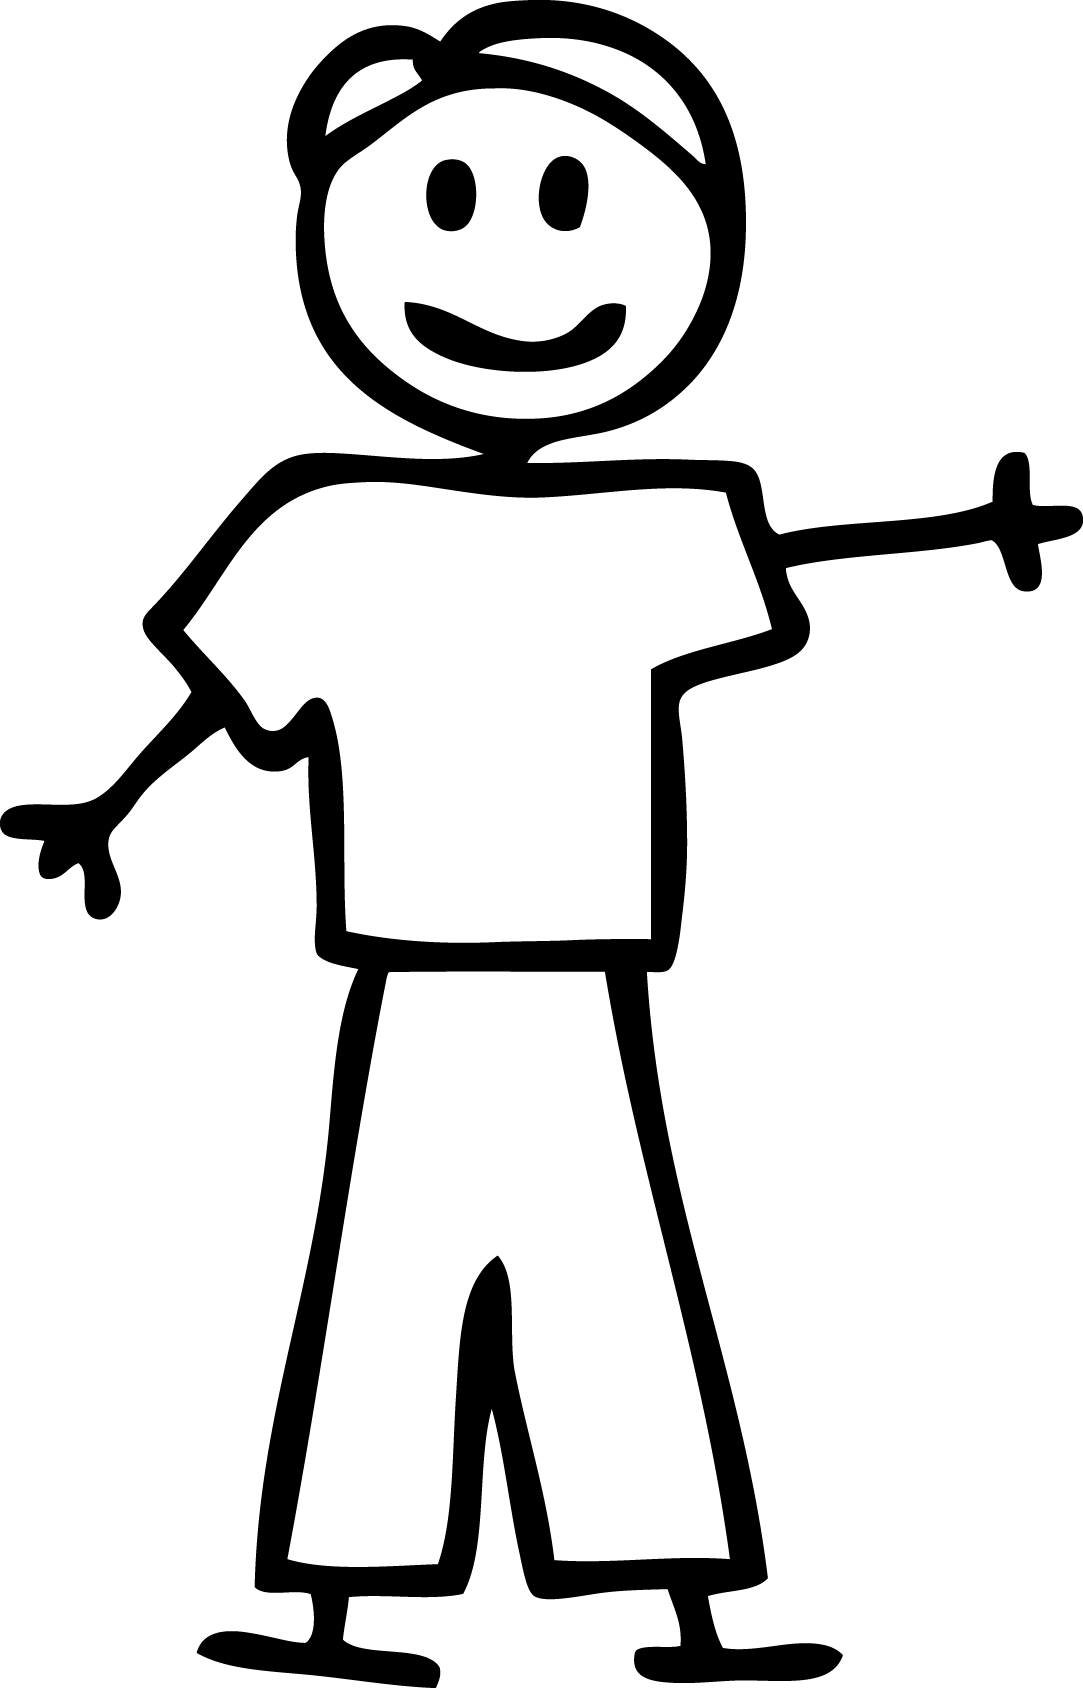 Clip Arts Related To : stick figure standing gif. 